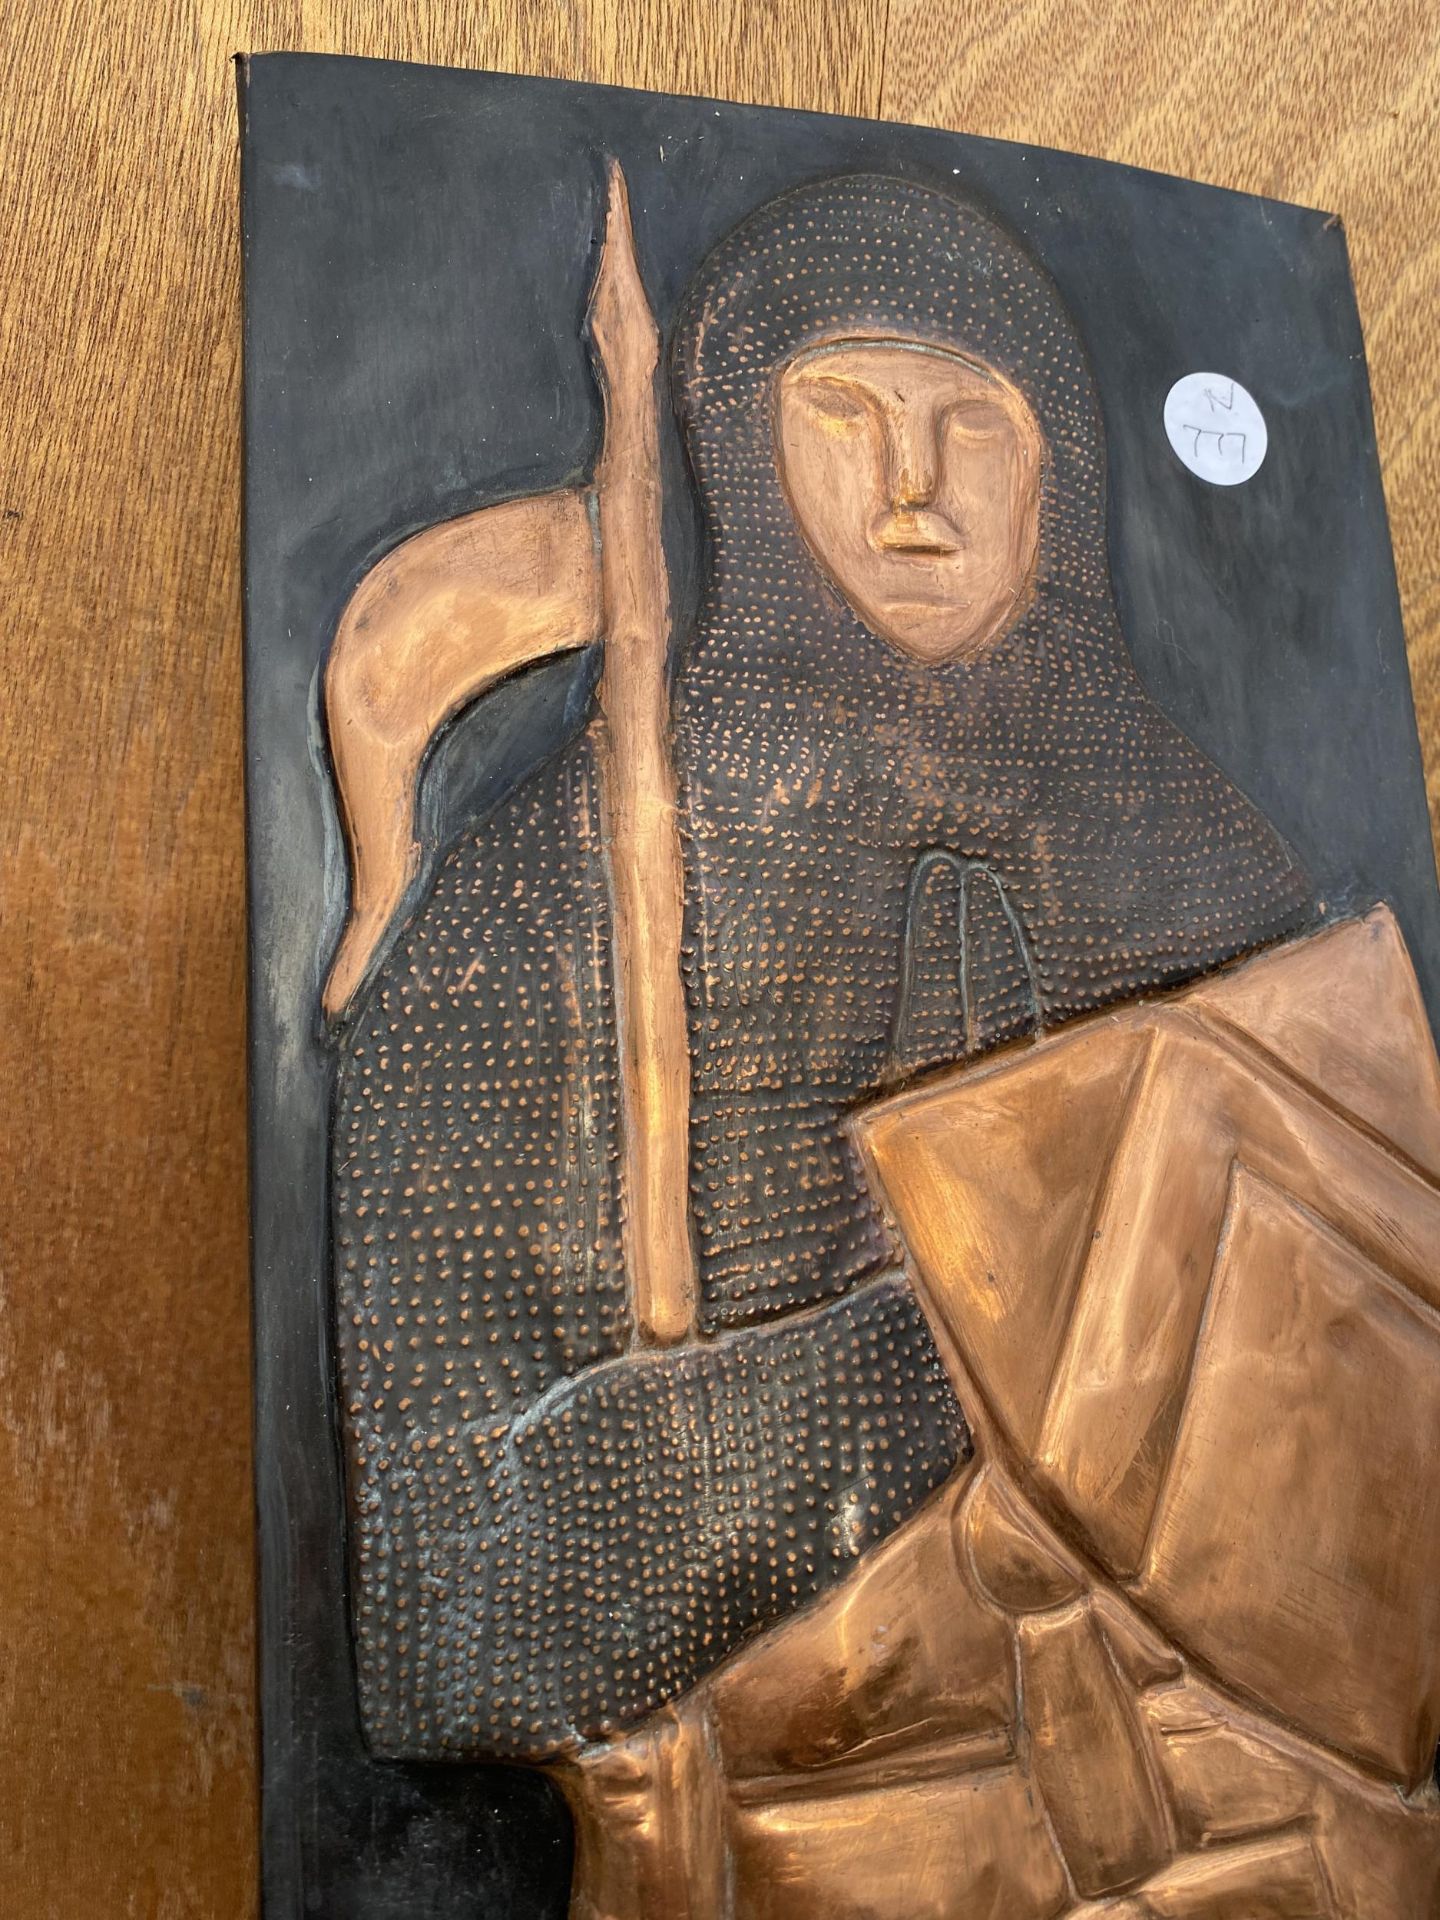 A COPPER EMBOSED PLAQUE DEPICTING A KNIGHT IN ARMOR - Image 3 of 3